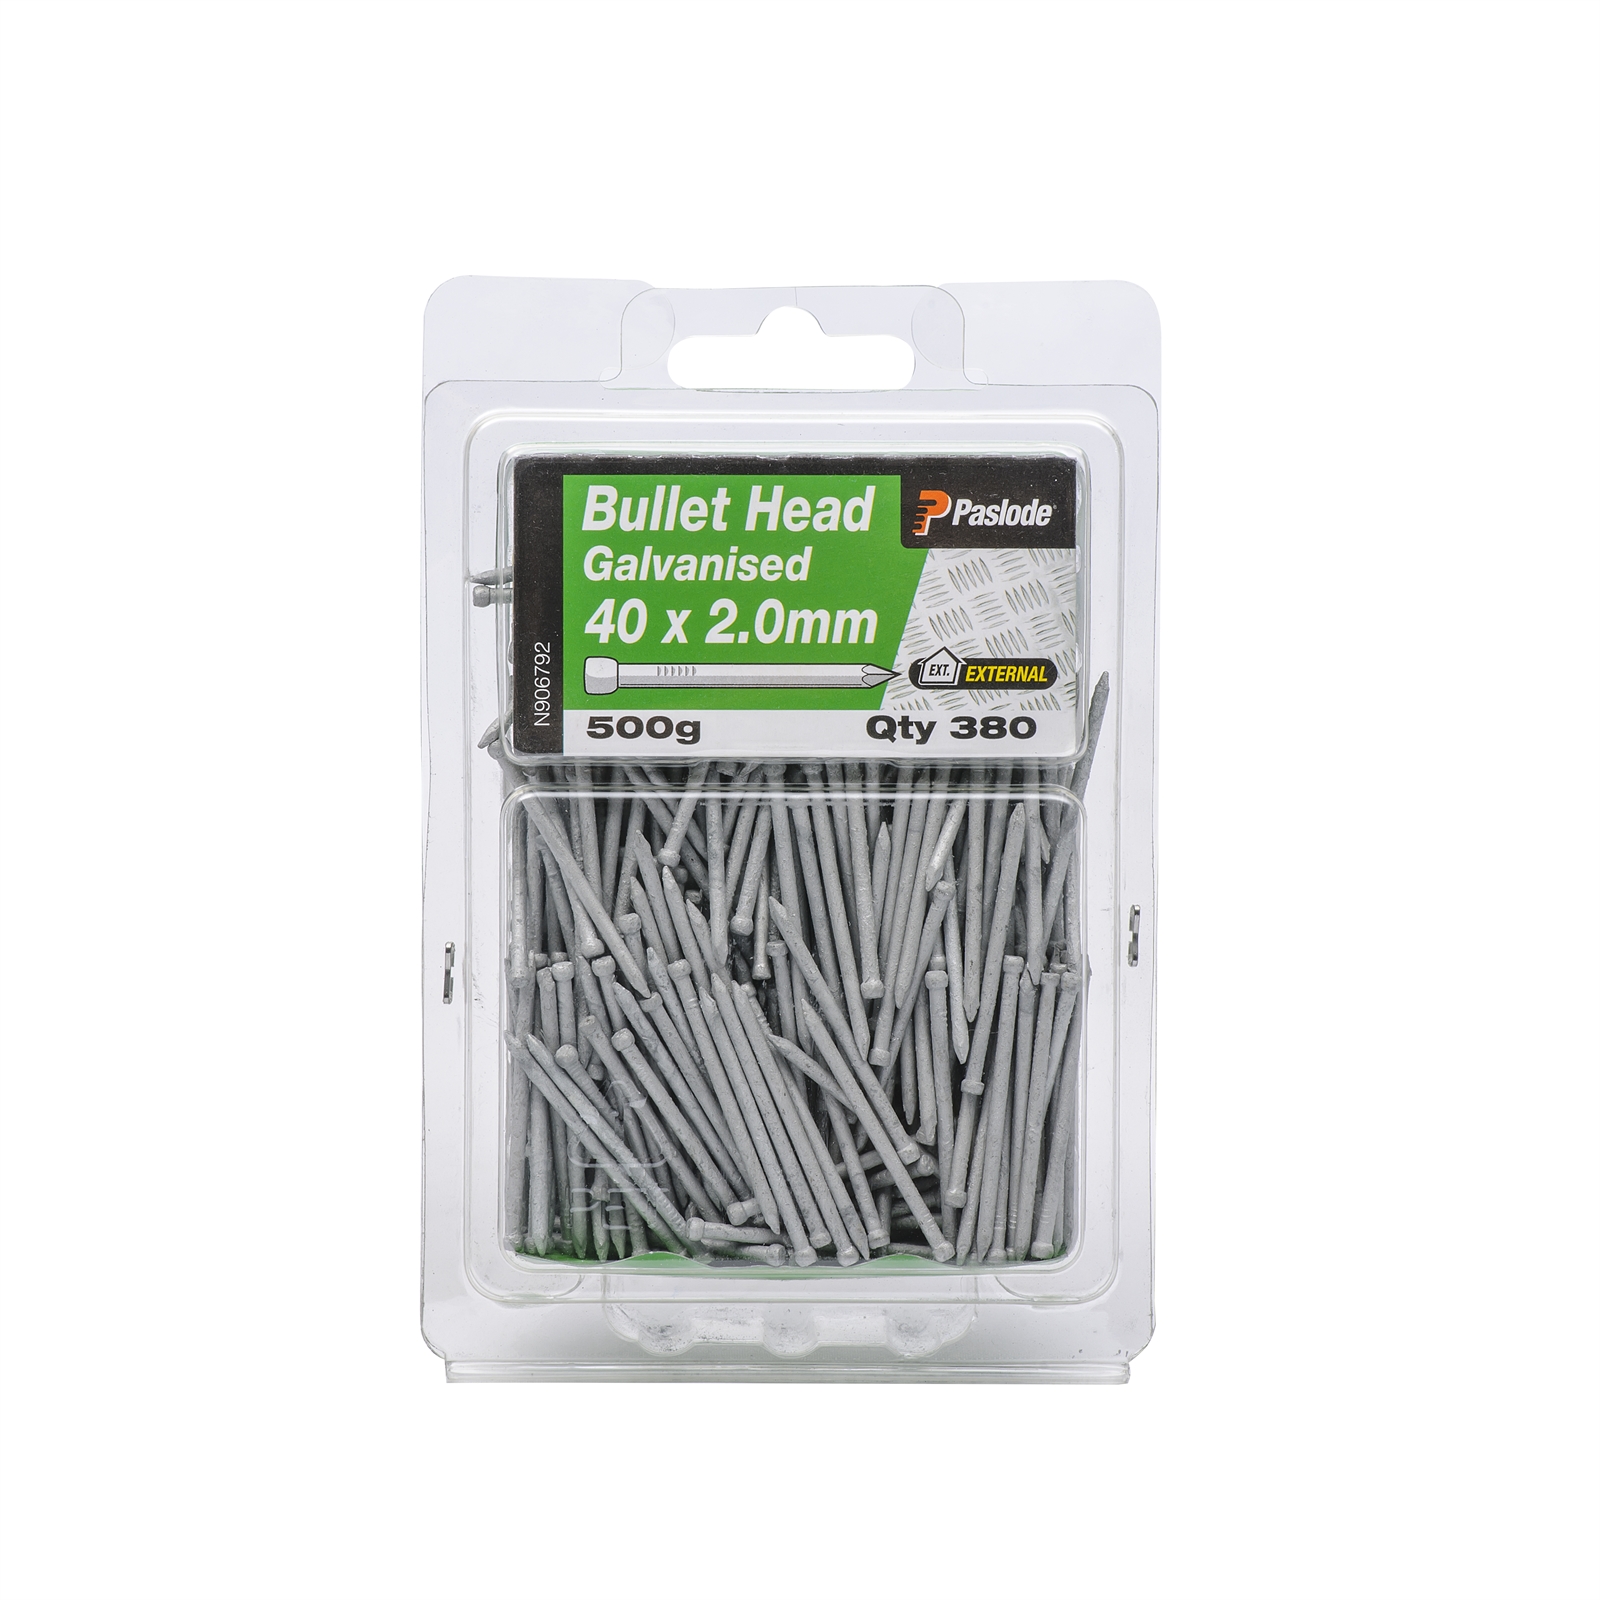 Paslode 40 x 2.0mm 500g Galvanised Bullet Head Nails - 380 Pack